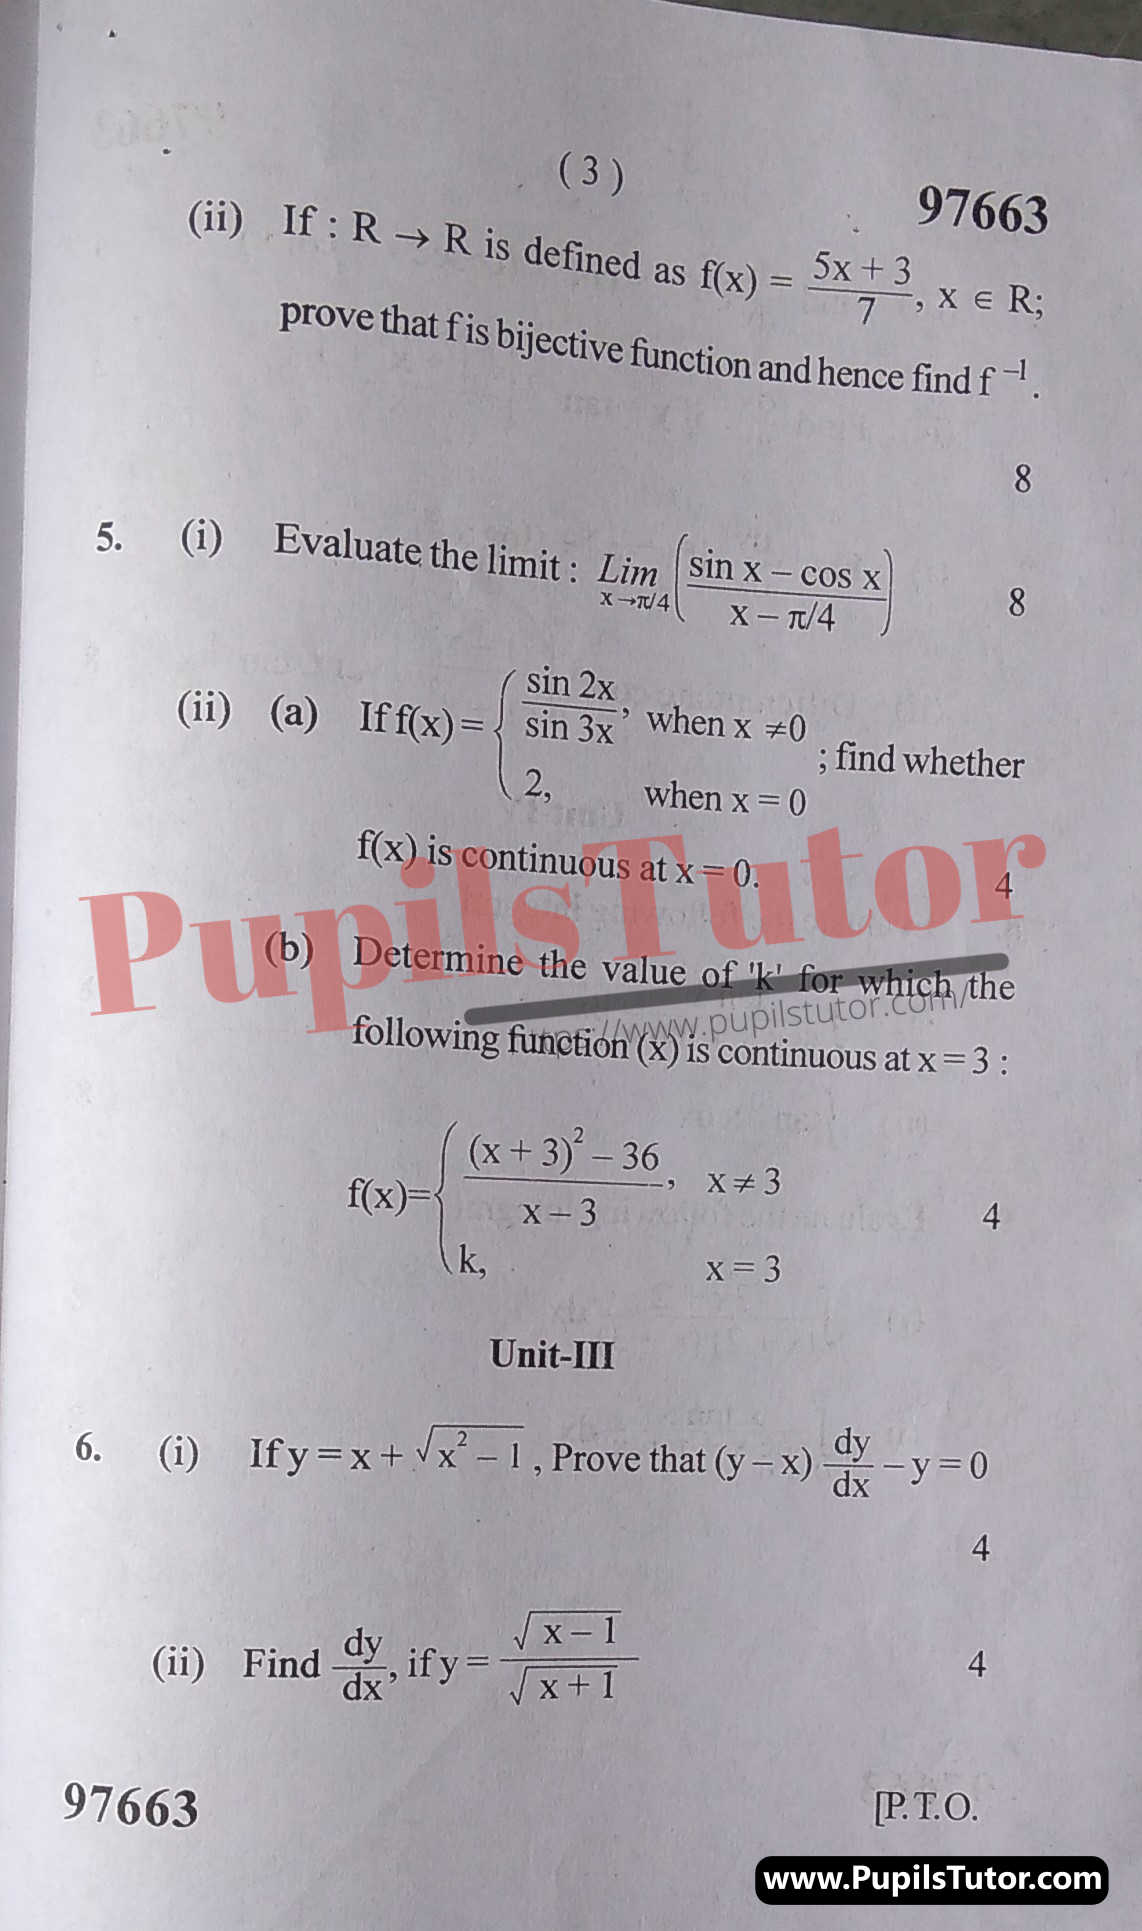 Free Download PDF Of M.D. University B.C.A First Semester Latest Question Paper For Mathematics Subject (Page 3) - https://www.pupilstutor.com